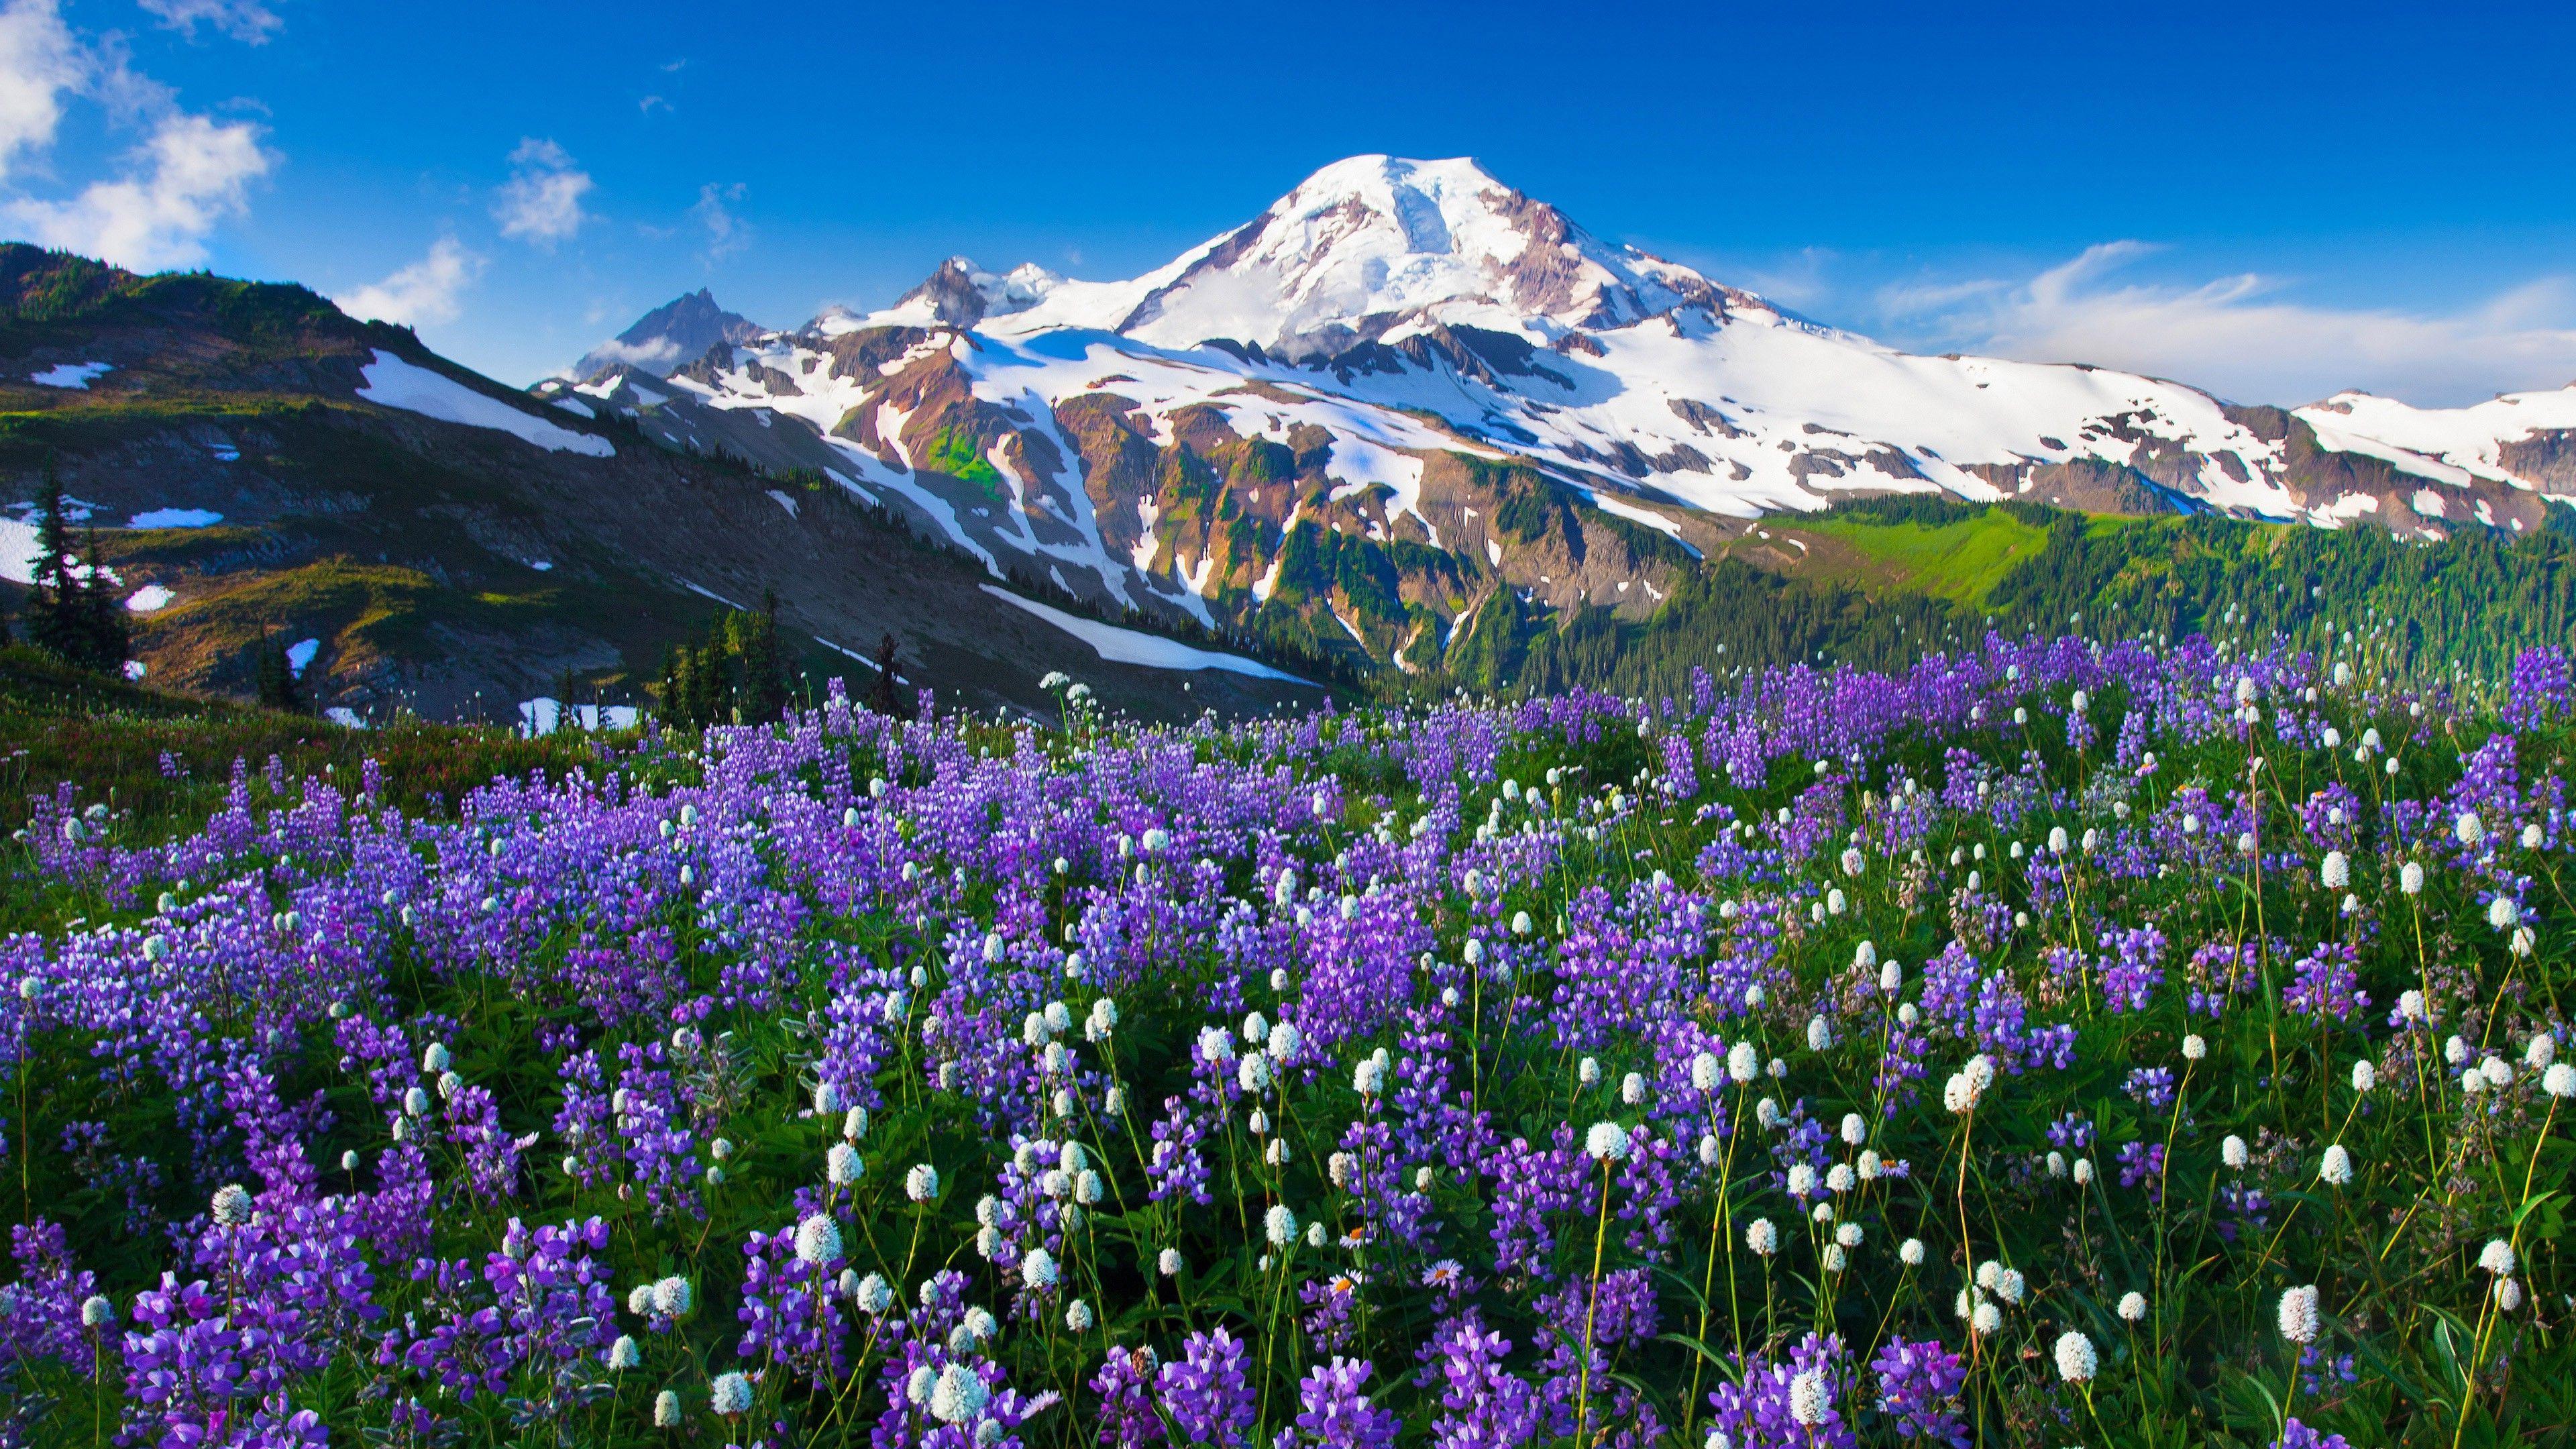 Mountain Flowers Wallpapers - Top Free Mountain Flowers Backgrounds ...